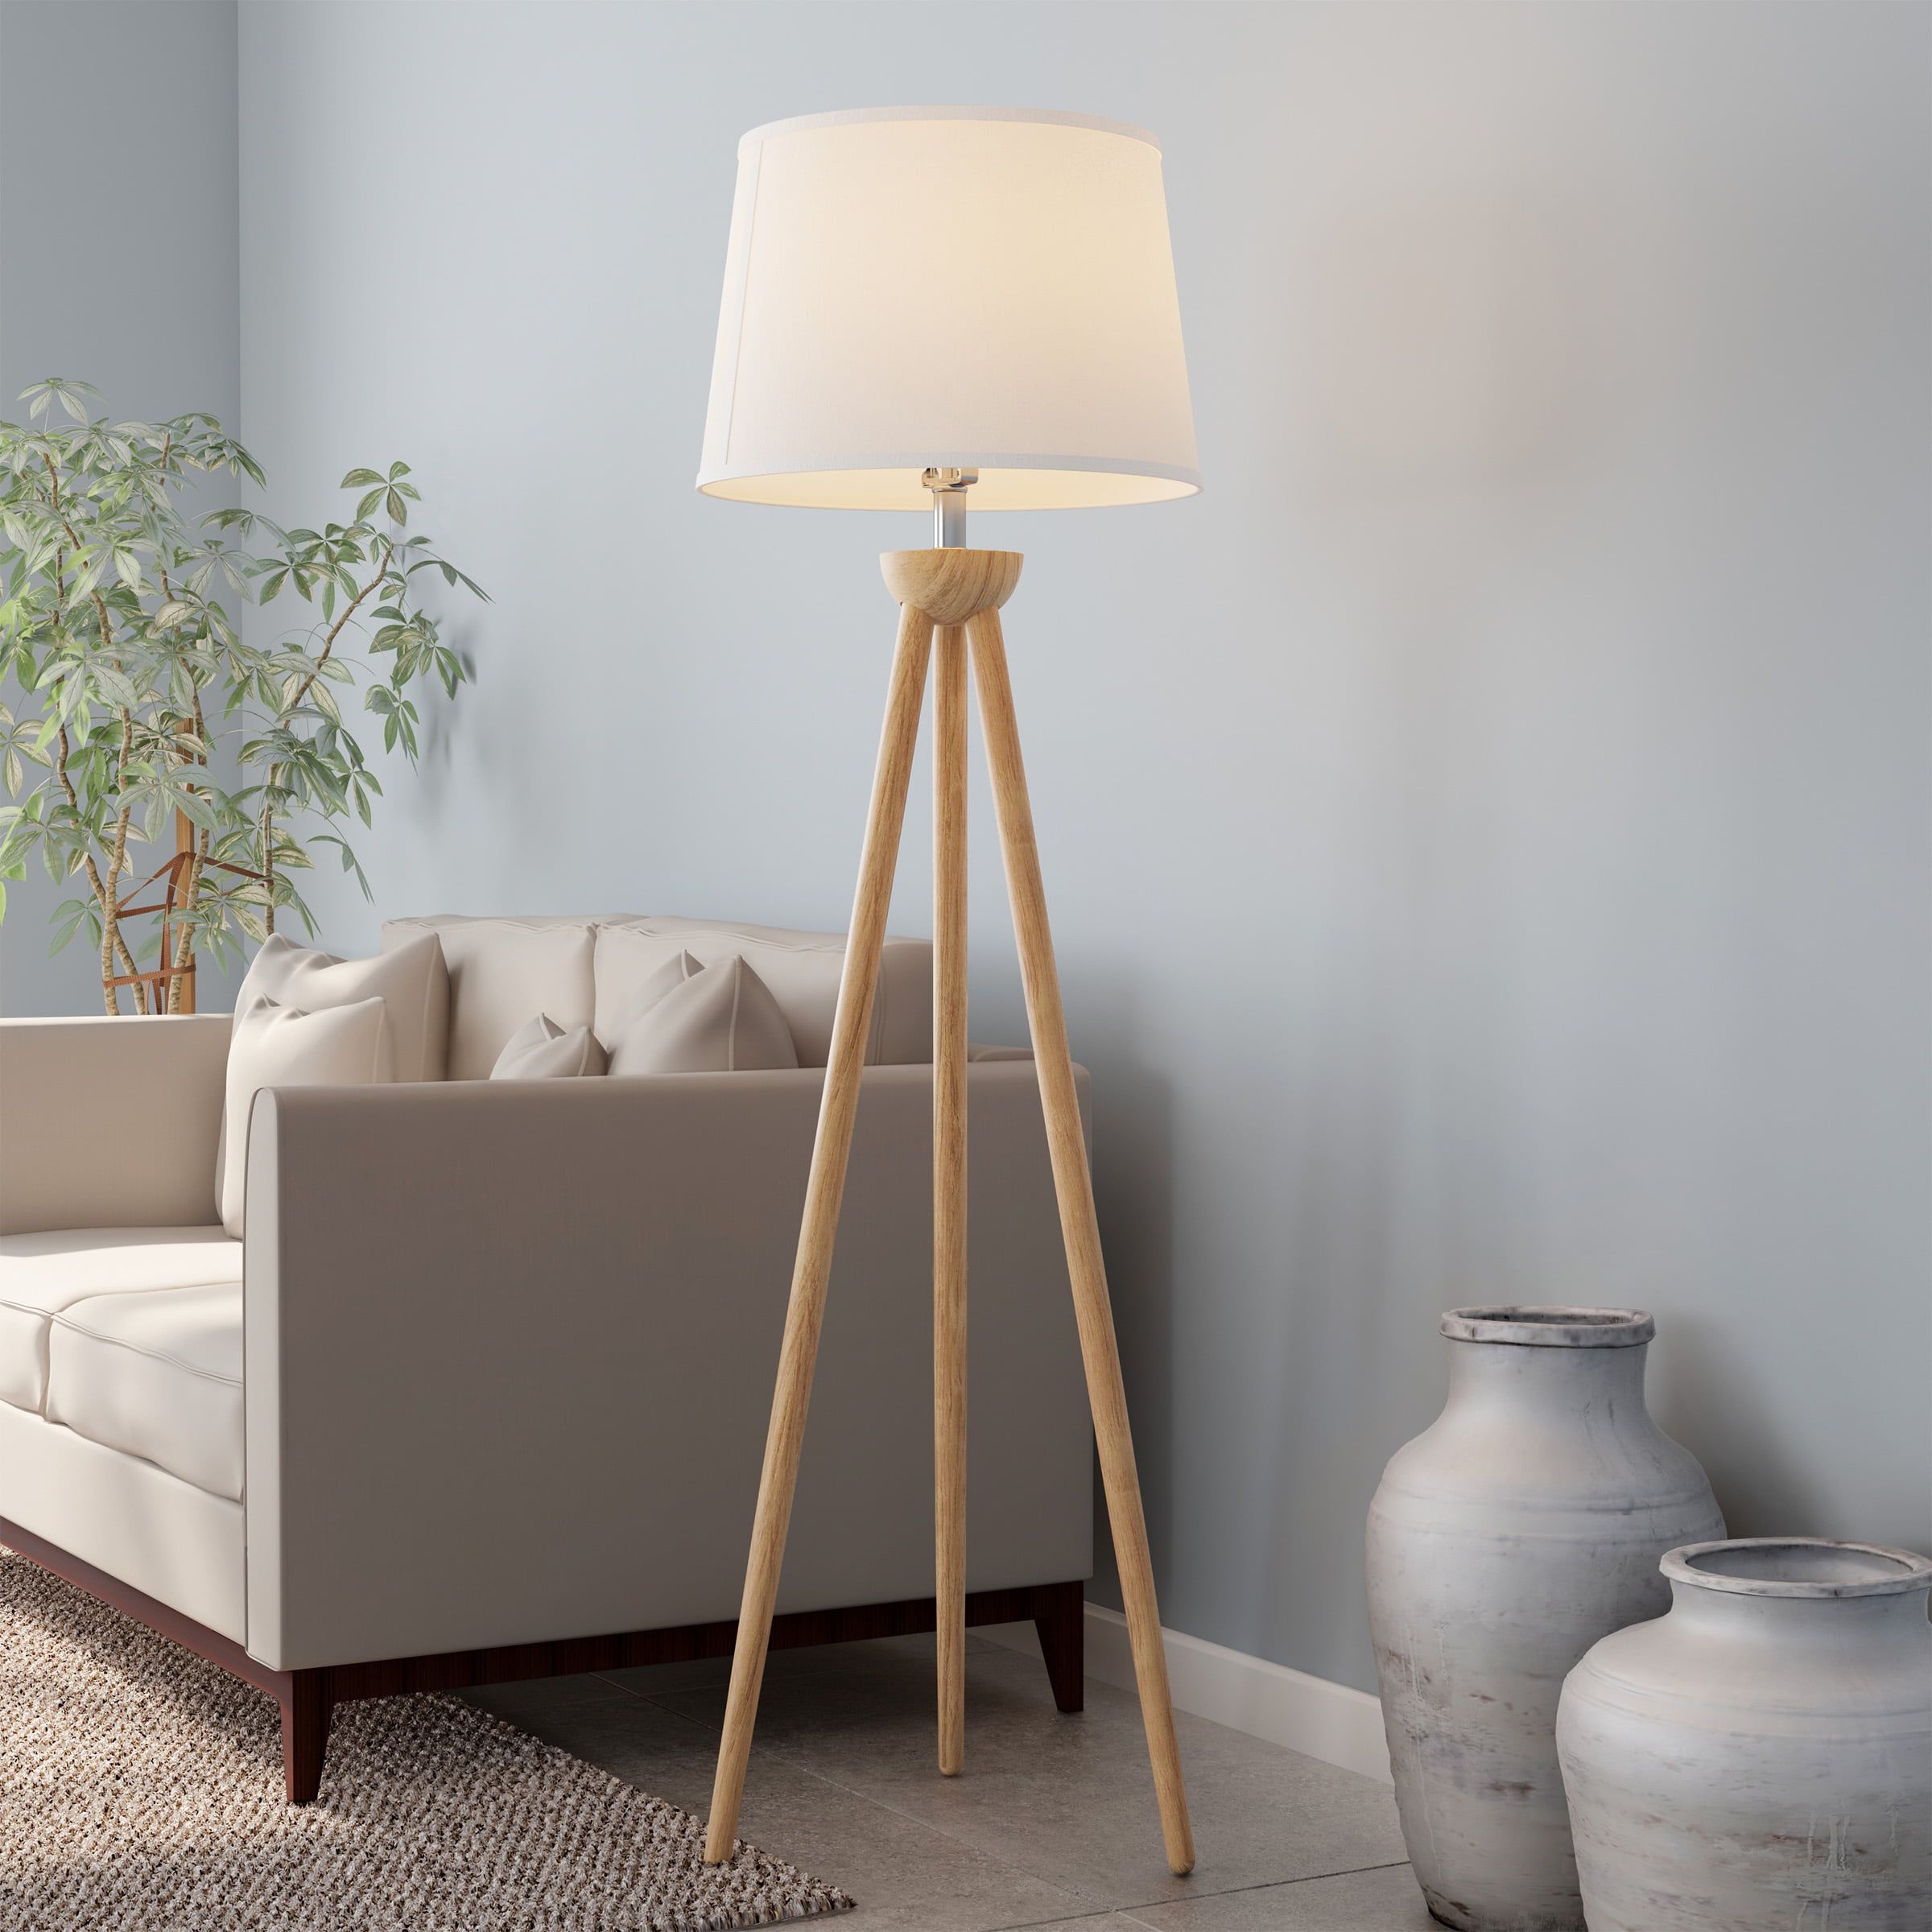 Tripod Floor Lamps Throughout Popular Lavish Home Tripod Floor Lamp With Led Bulb And Natural Oak Wood Base –  Walmart (View 4 of 15)